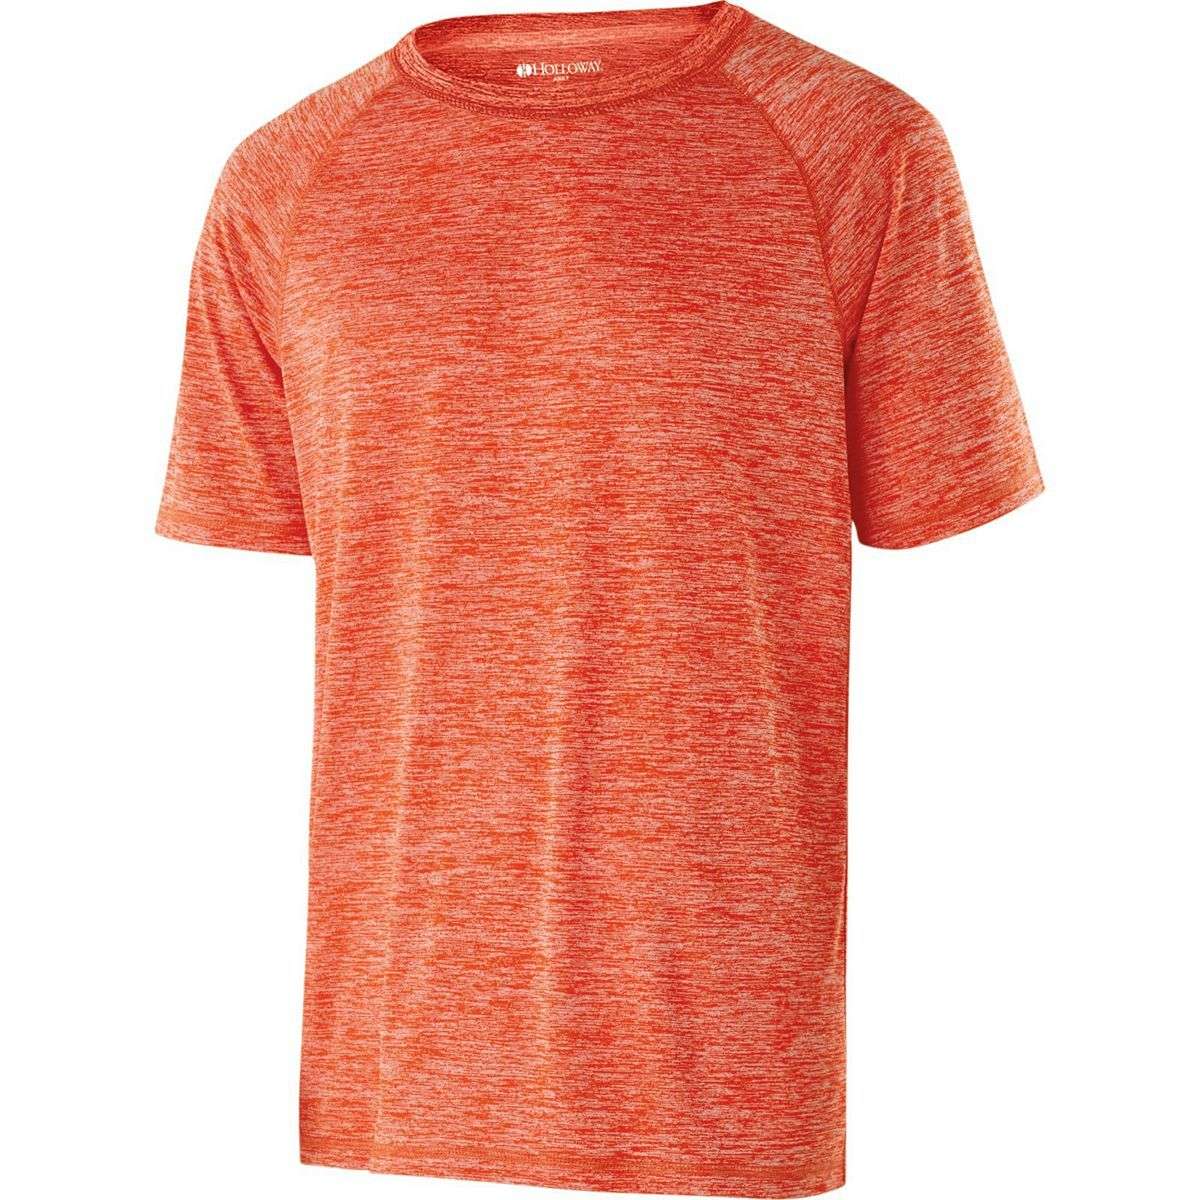 Selected Color is Orange Heather